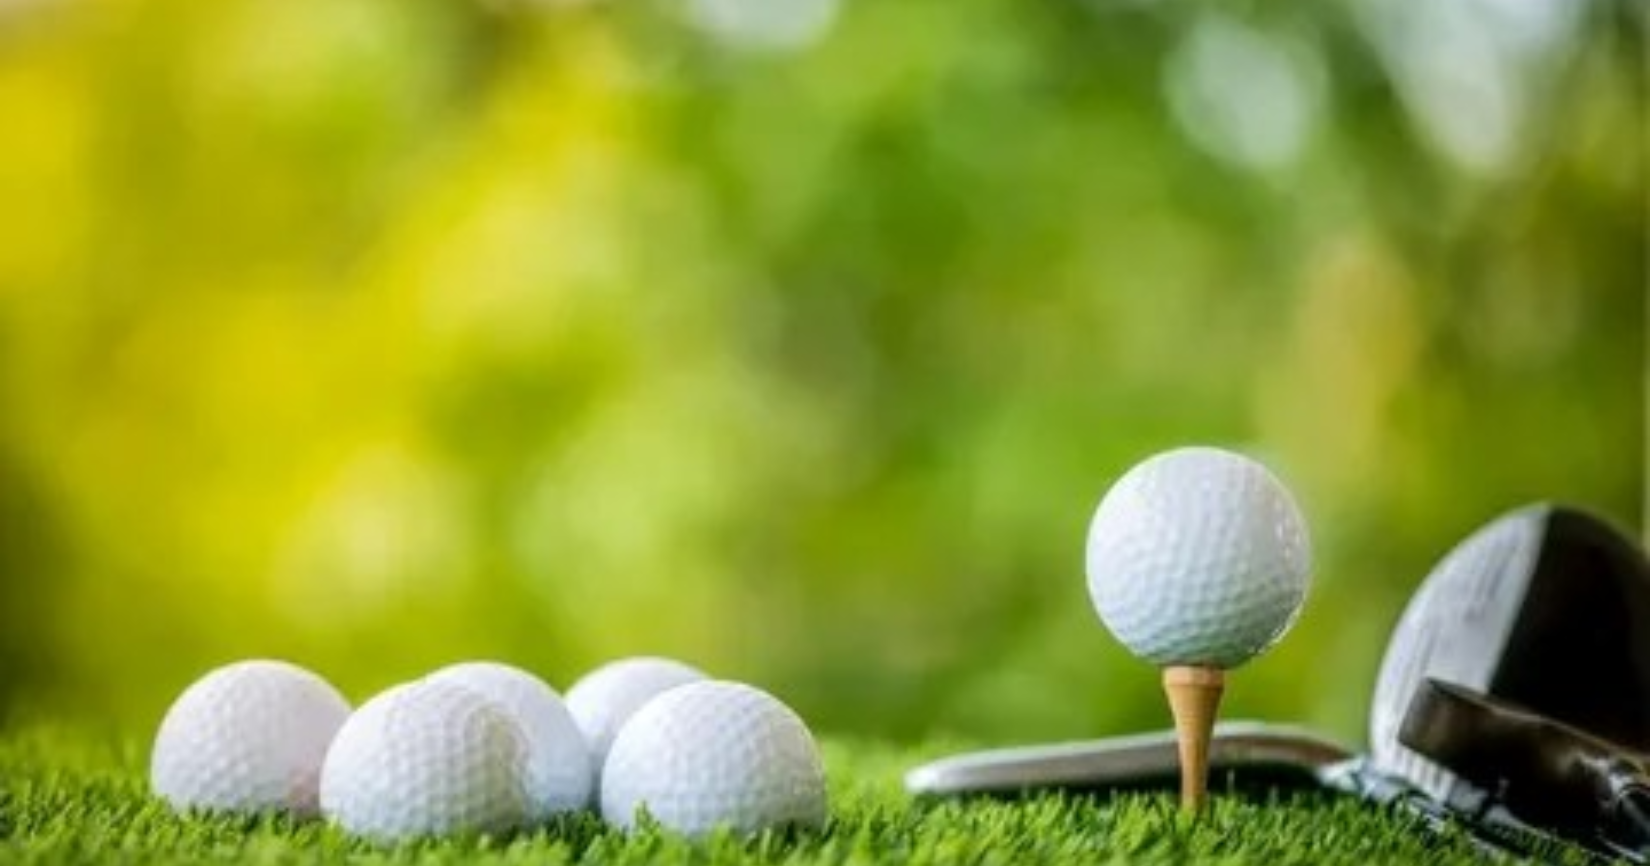 How Much Are Golf Balls Worth?